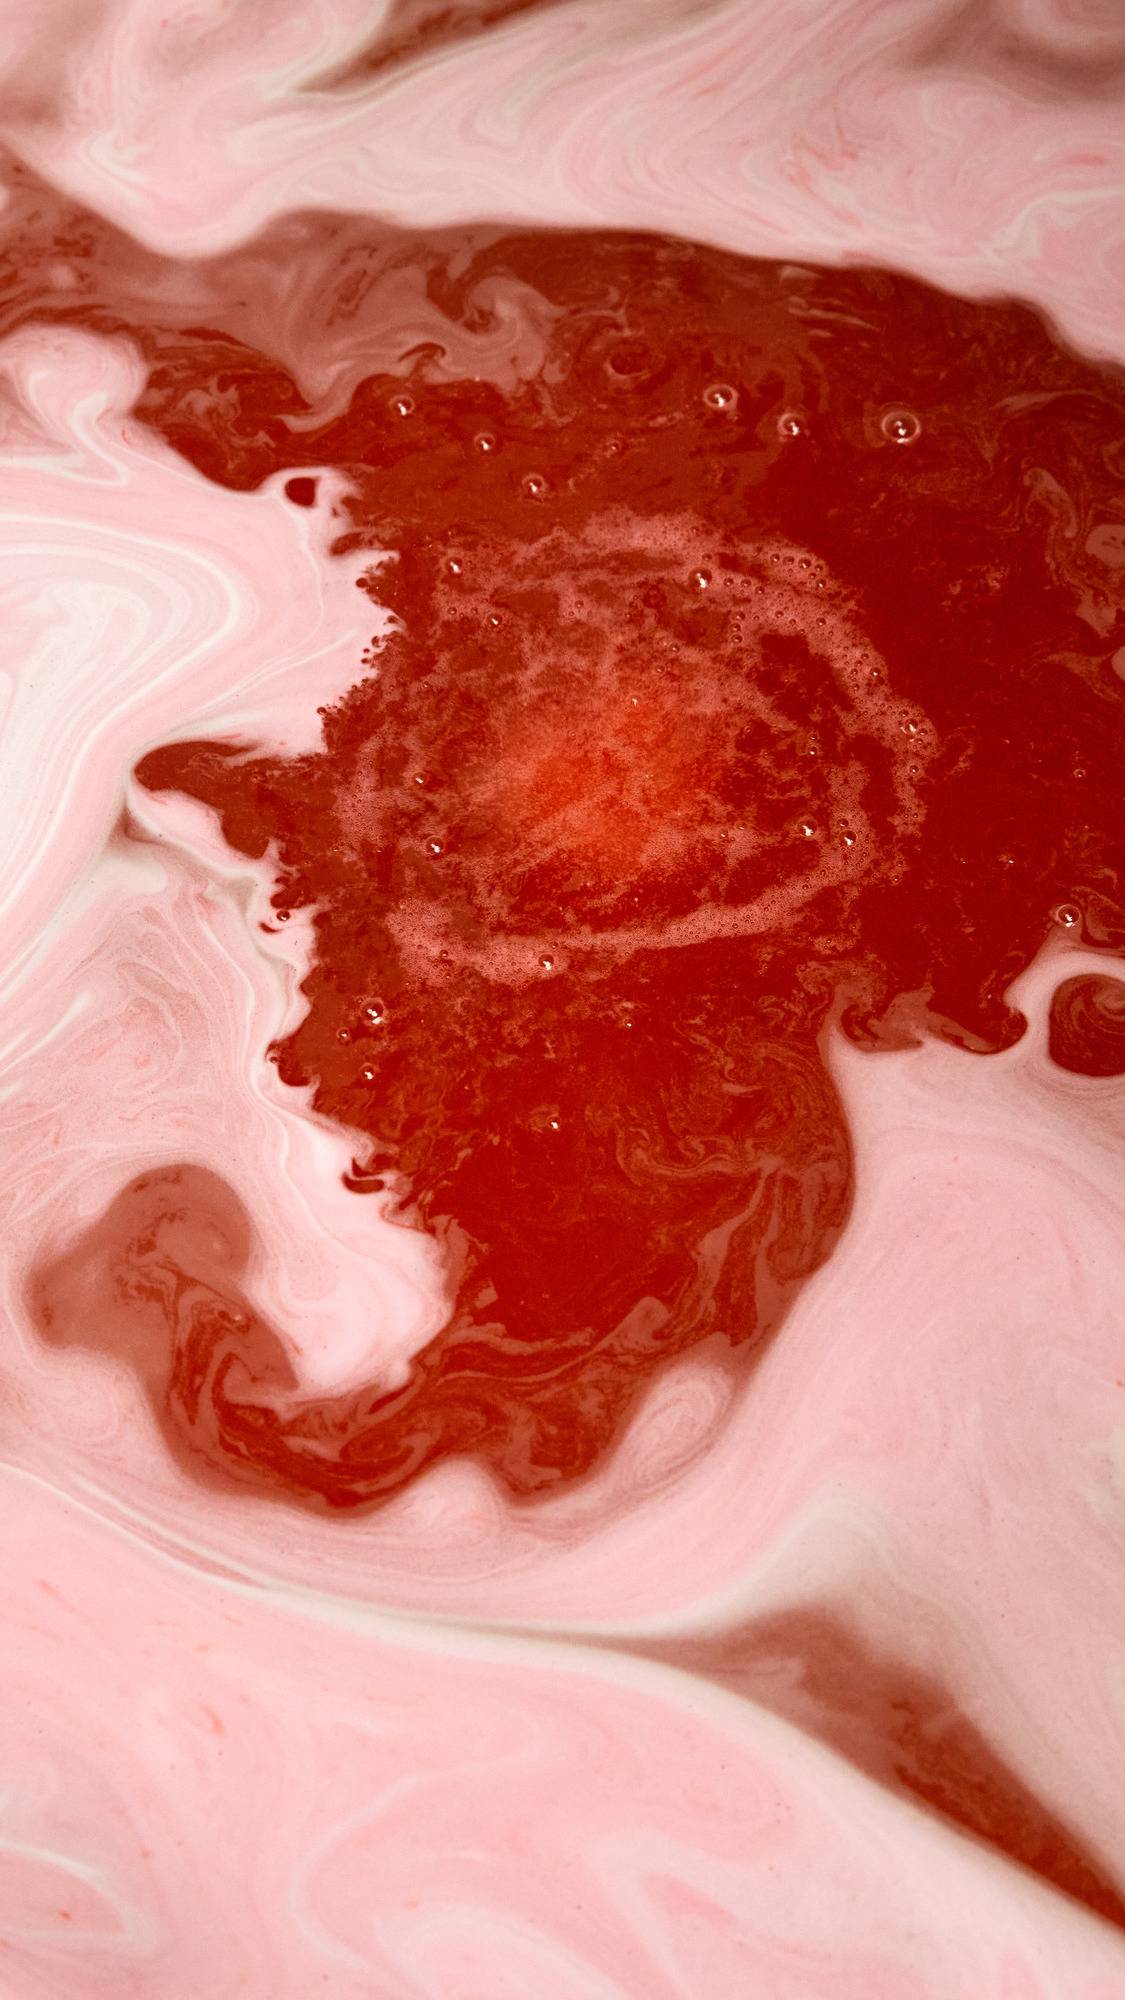 The Apple A Day bath bomb has completely dissolved leaving behind deep, garnet-red waters with delicate, light foam scattered on top.